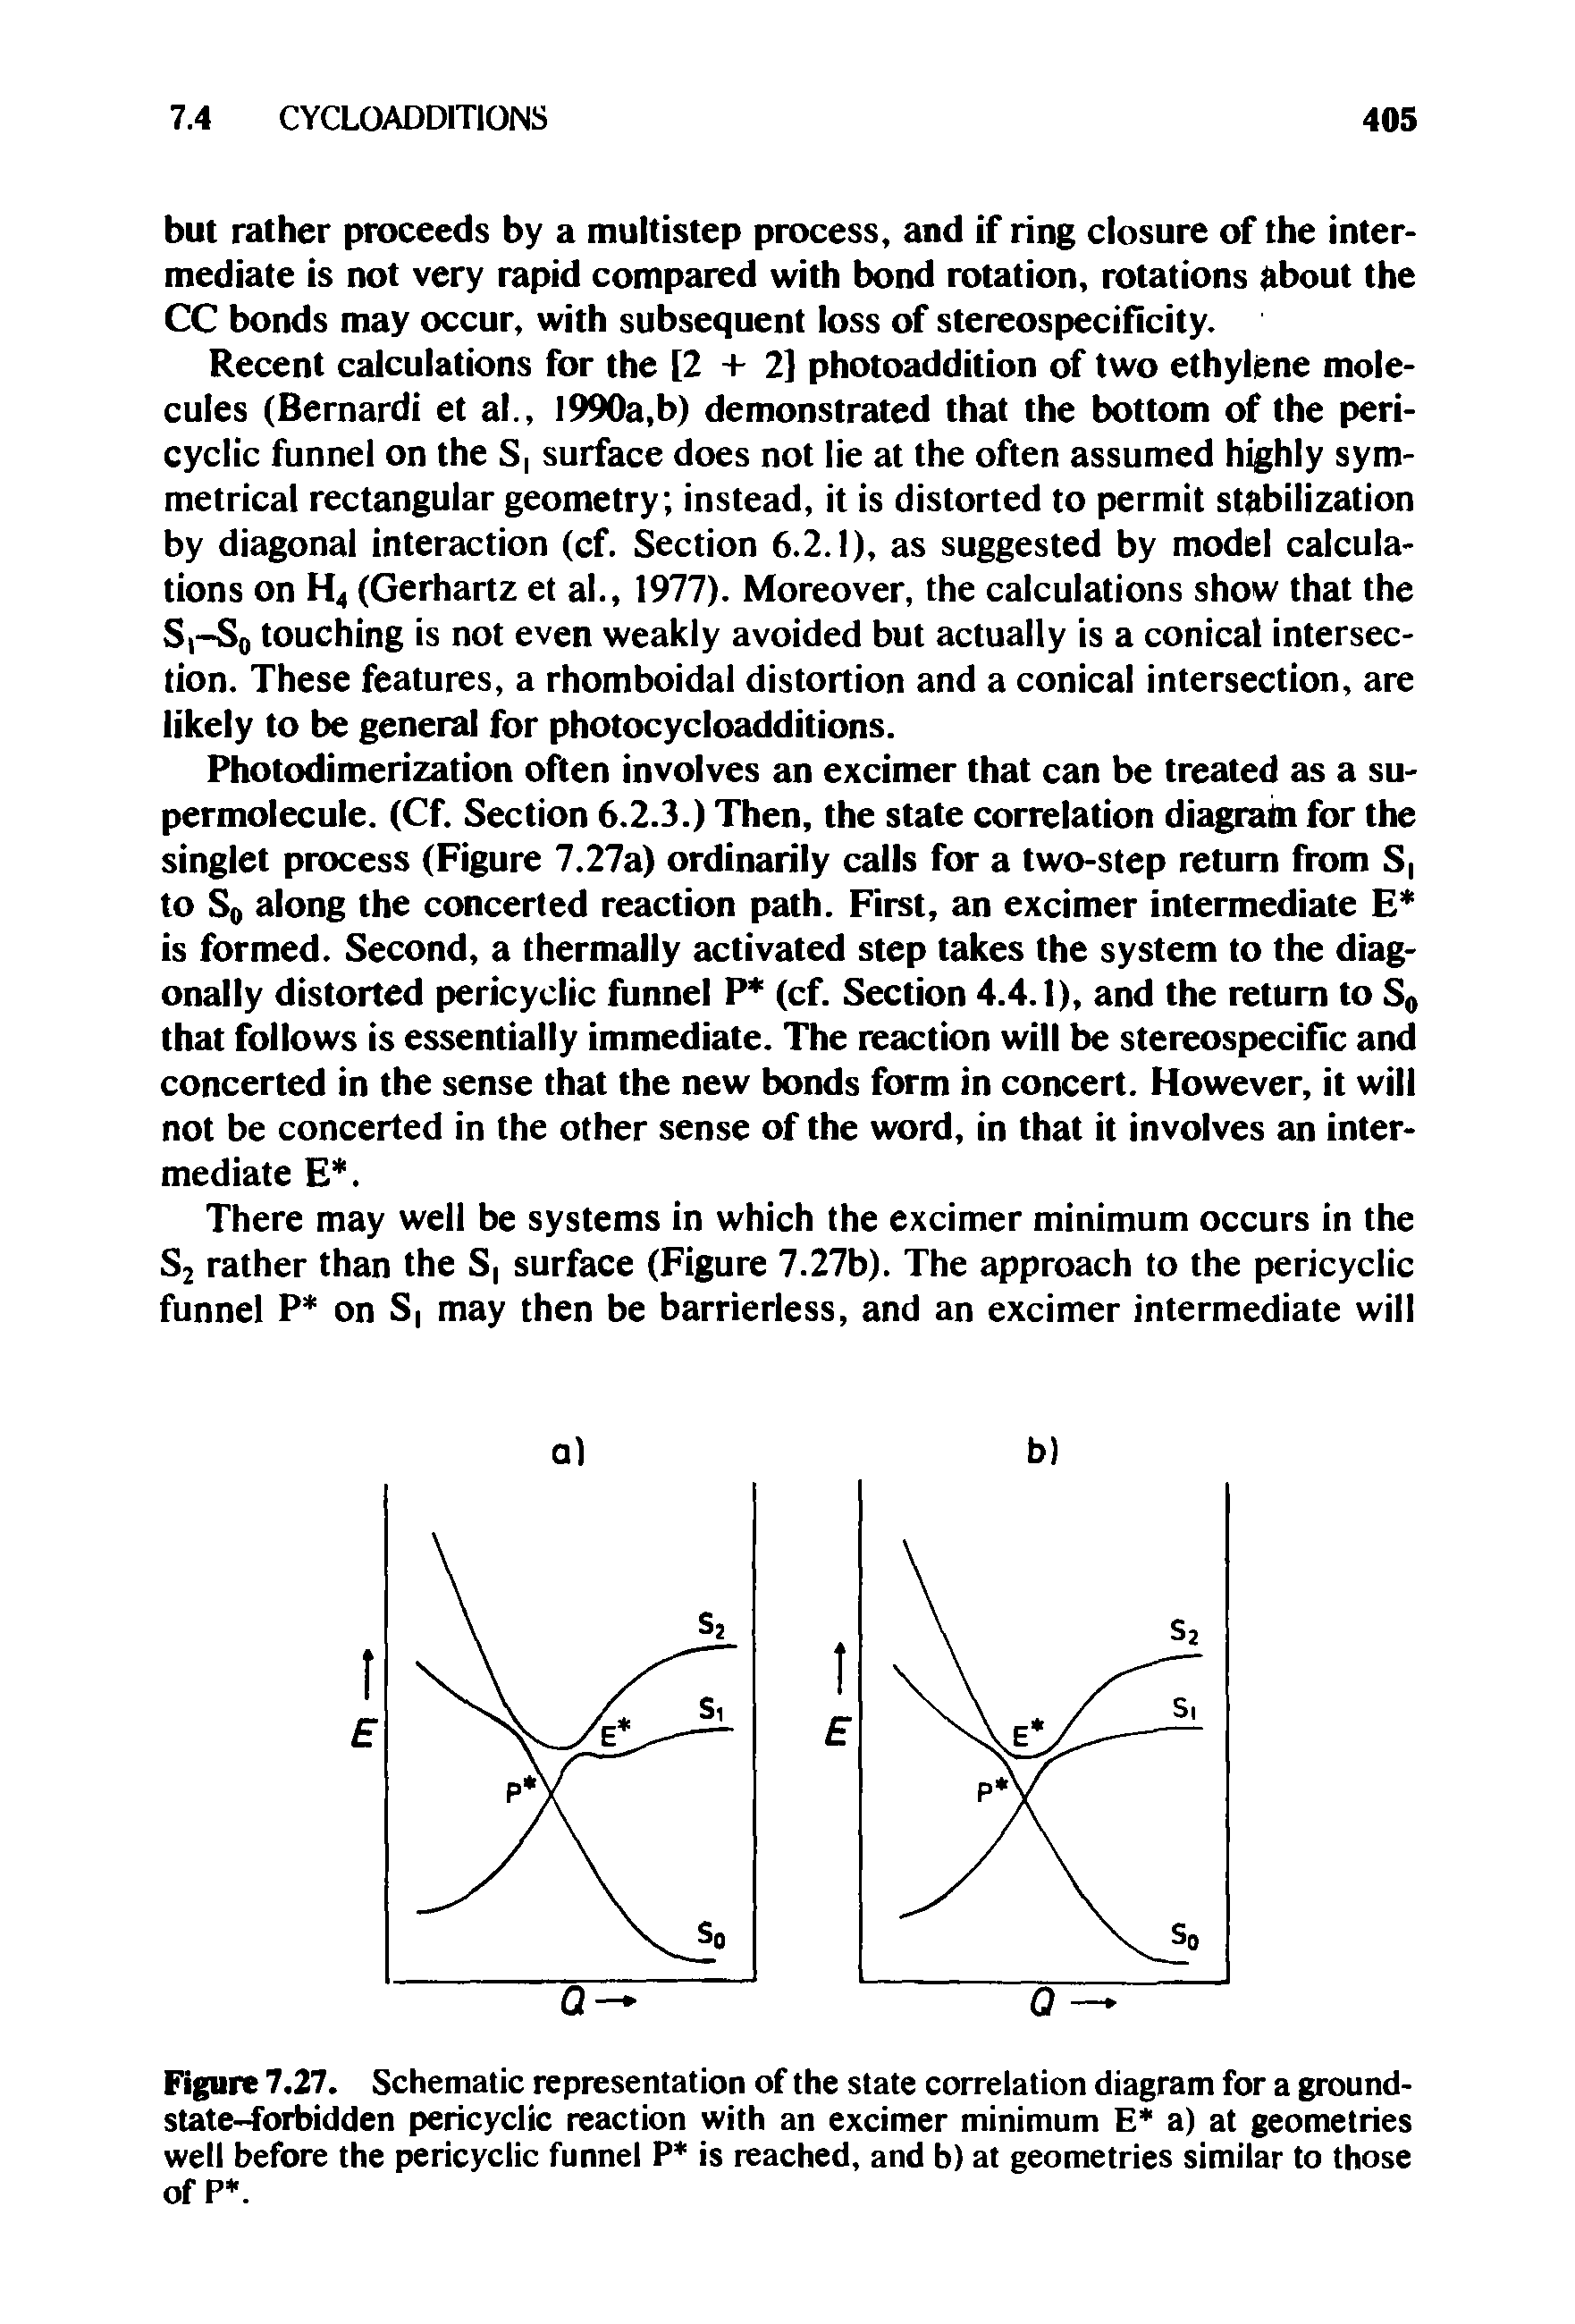 Figure 7.27. Schematic representation of the state correlation diagram for a ground-state-forbidden pericyclic reaction with an excimer minimum E a) at geometries well before the pericyclic funnel P is reached, and b) at geometries similar to those of P. ...